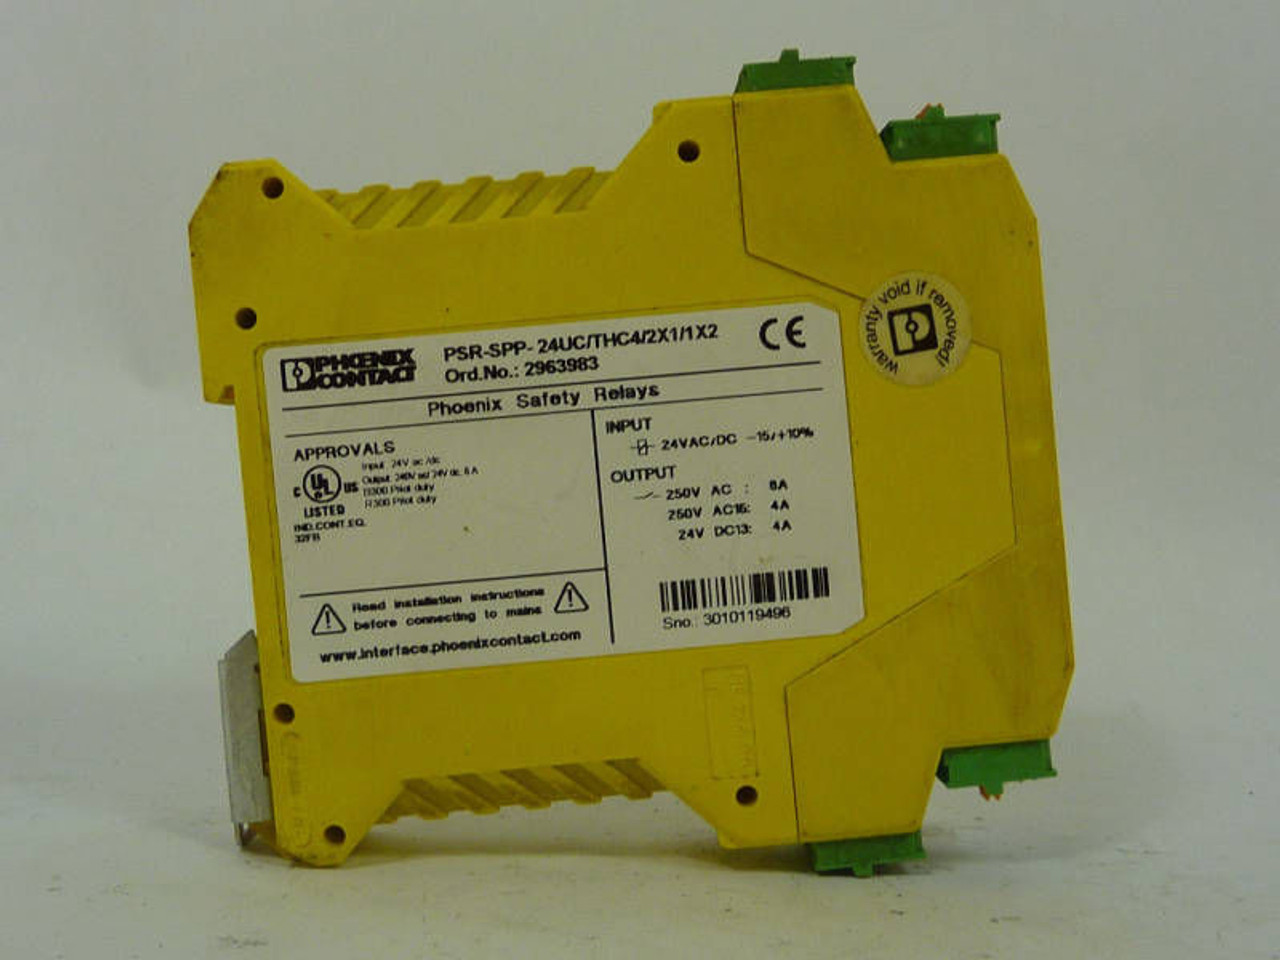 Phoenix Contact Safety Relay PSR-SPP-24UC/THC4/2X1/1X2 USED